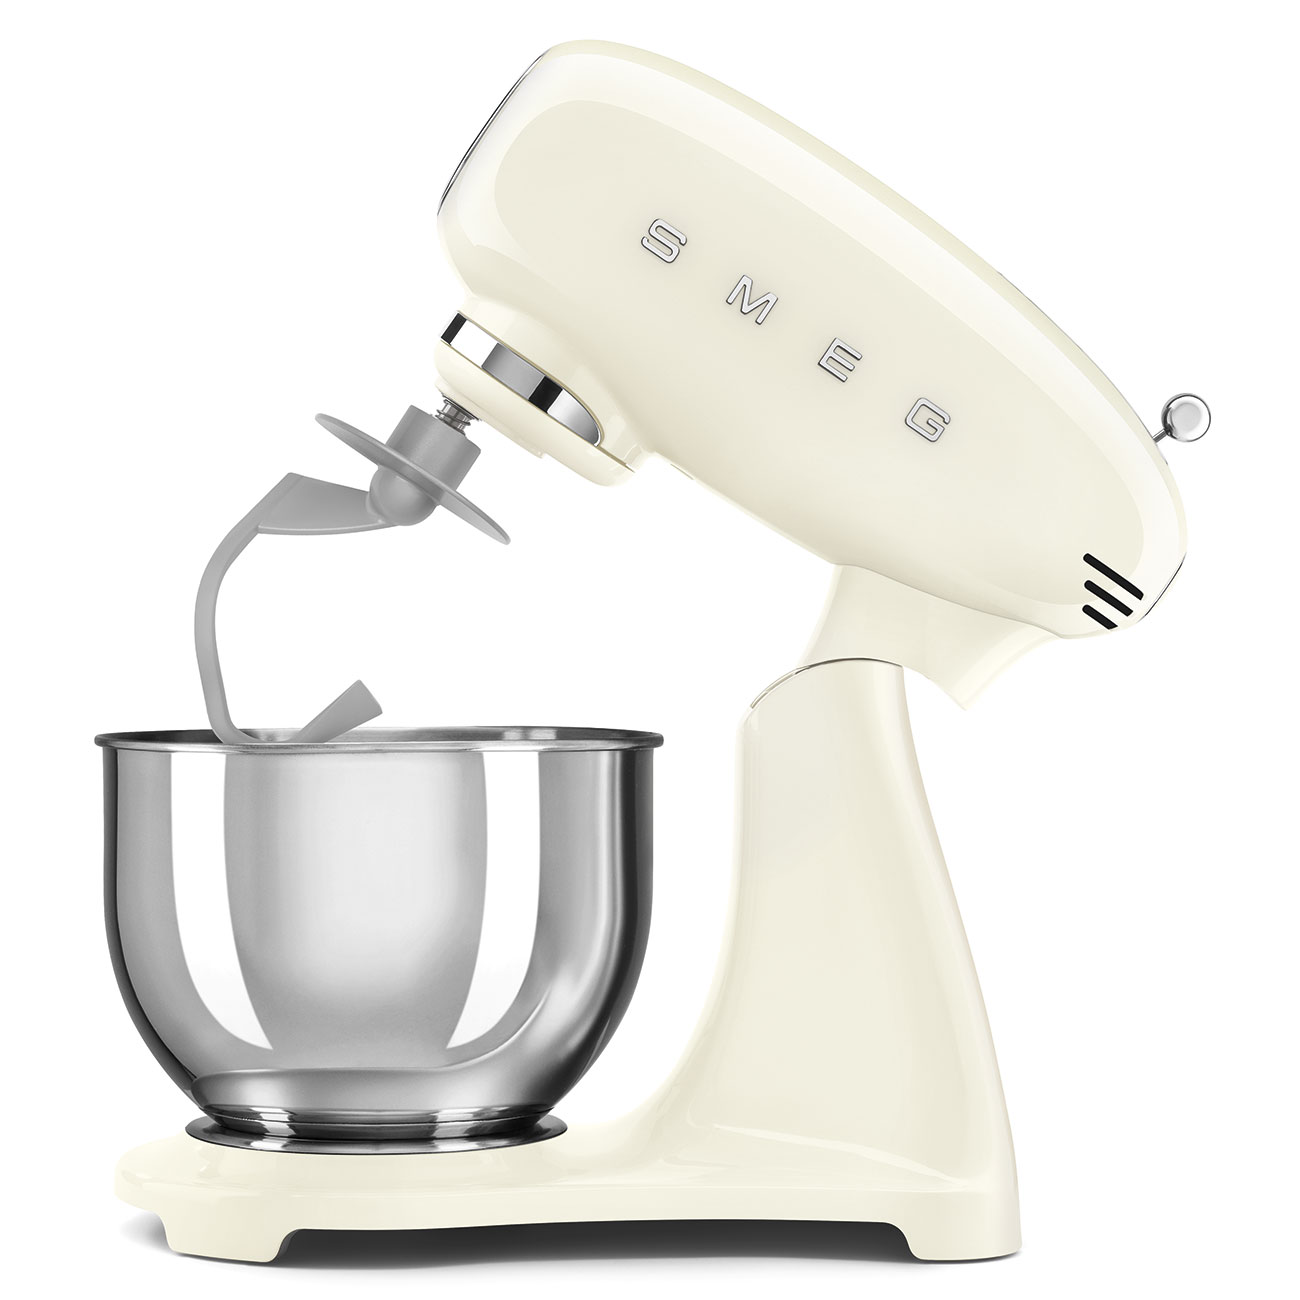 Cream Food Mixer with 4.8l stainless steel bowl - SMF03CRUK_3